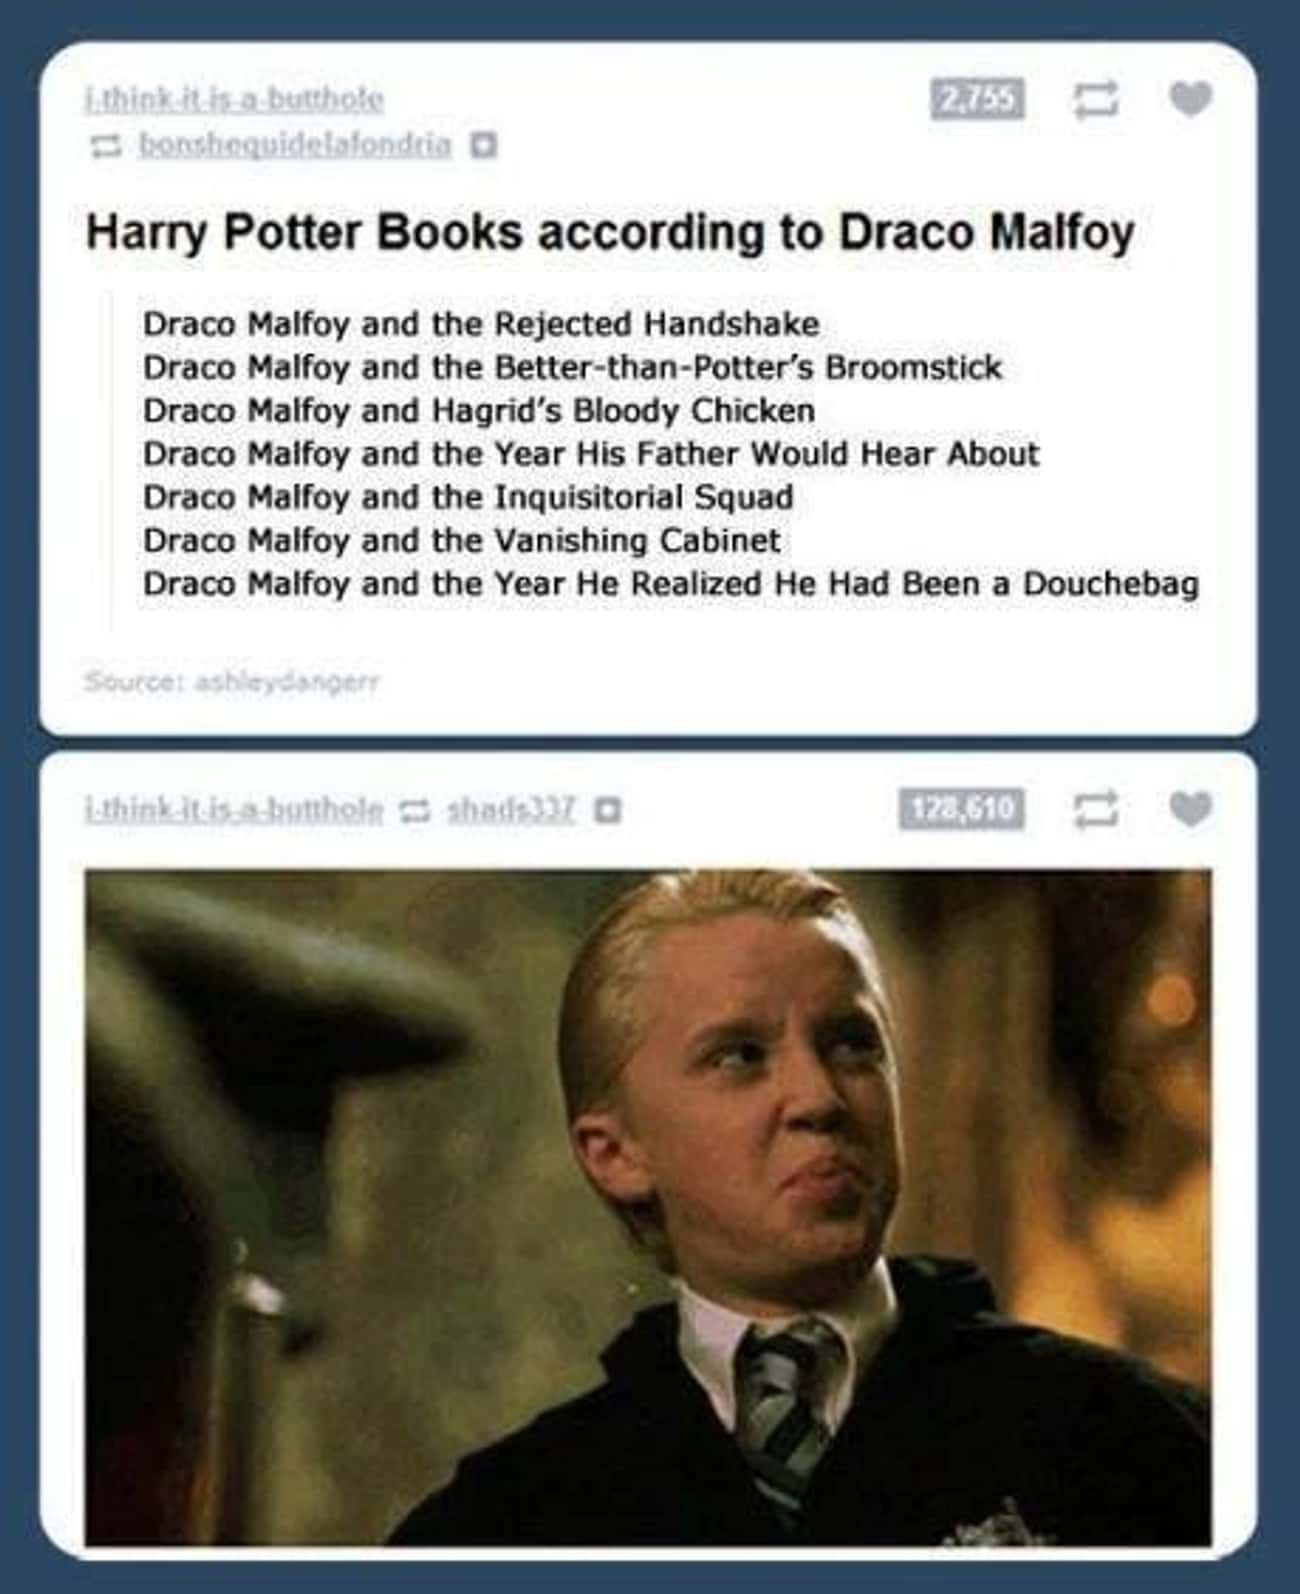 Draco Malfoy Meme defining books by his experiences